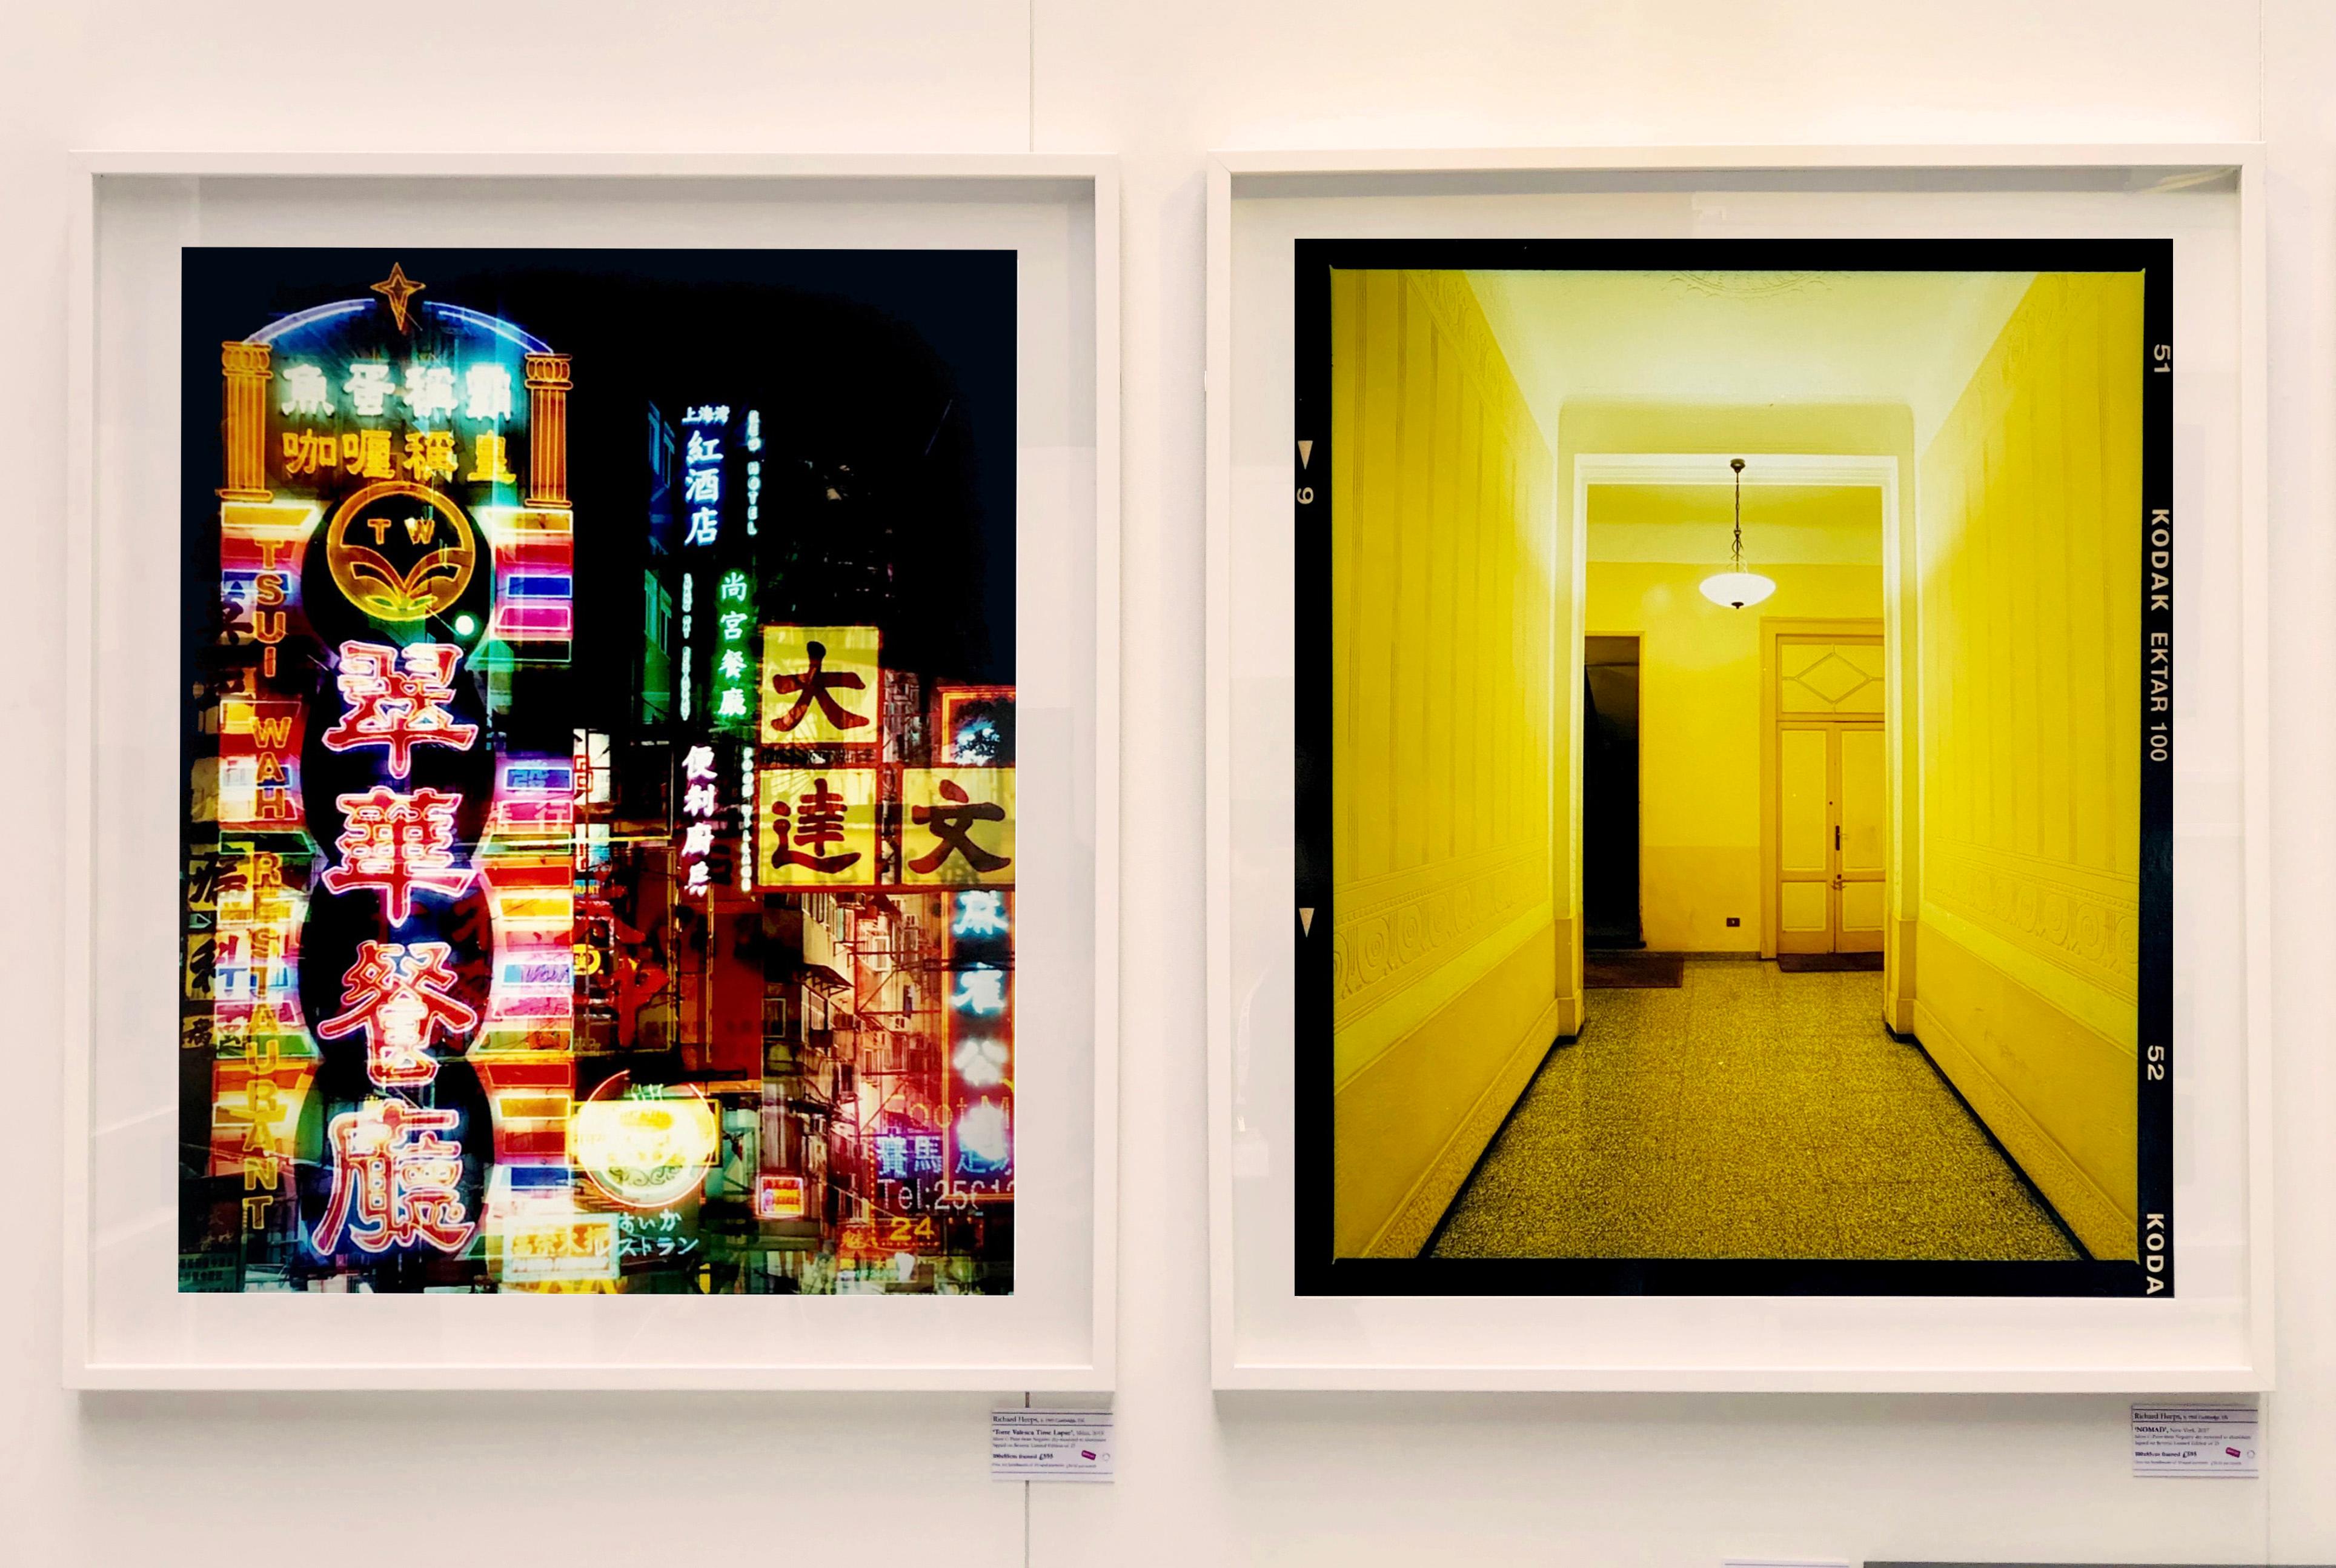 Yellow Corridor, from Richard Heeps series A Short History of Milan which began as a special project for the 2018 Affordable Art Fair Milan. It was well received and the artwork has become popular with art buyers around the world. Richard continues